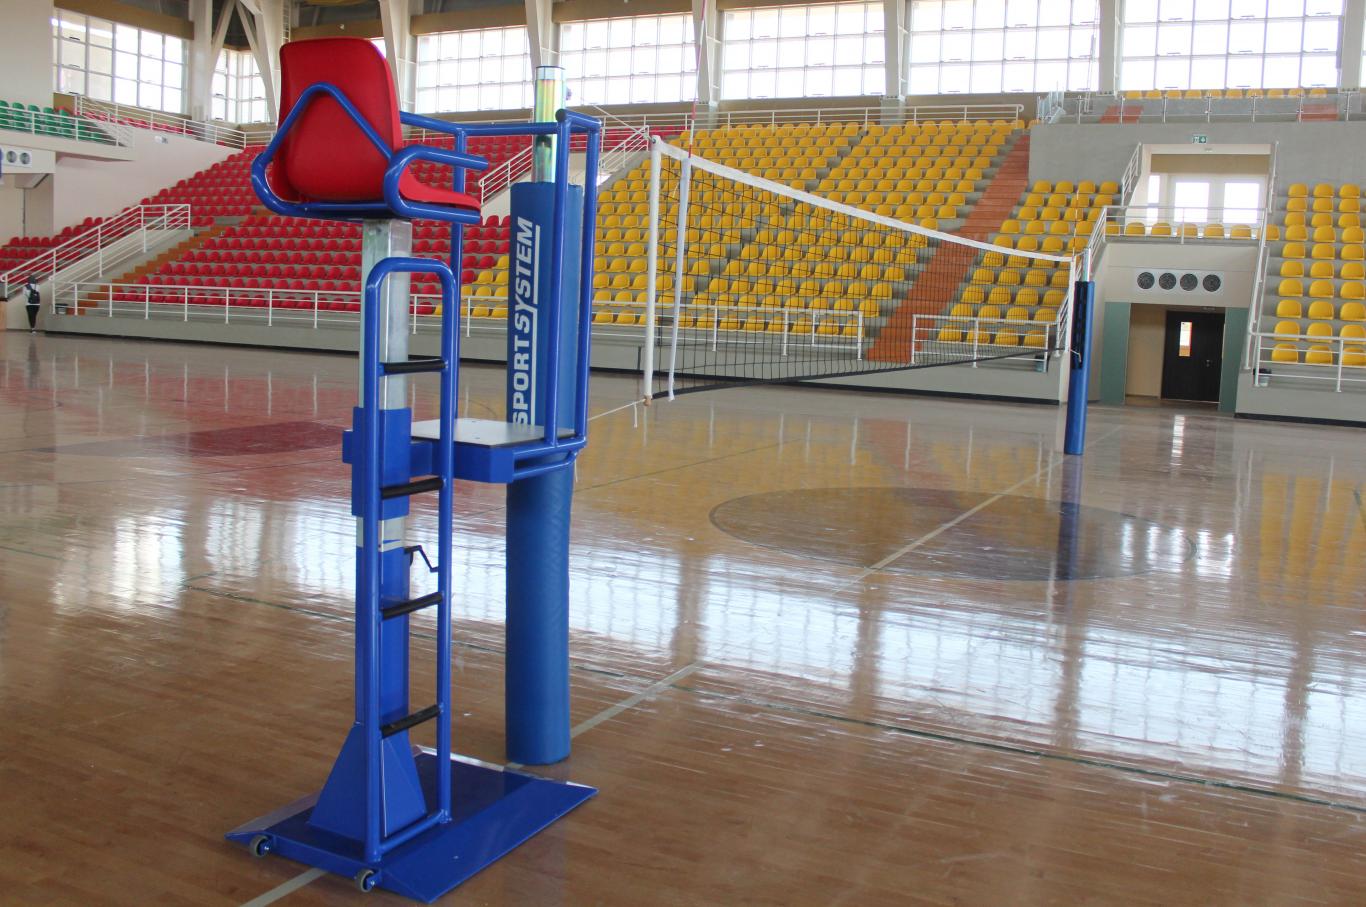 Installing and Equipping Sports Equipment in the Arab American University Closed Gym Hall